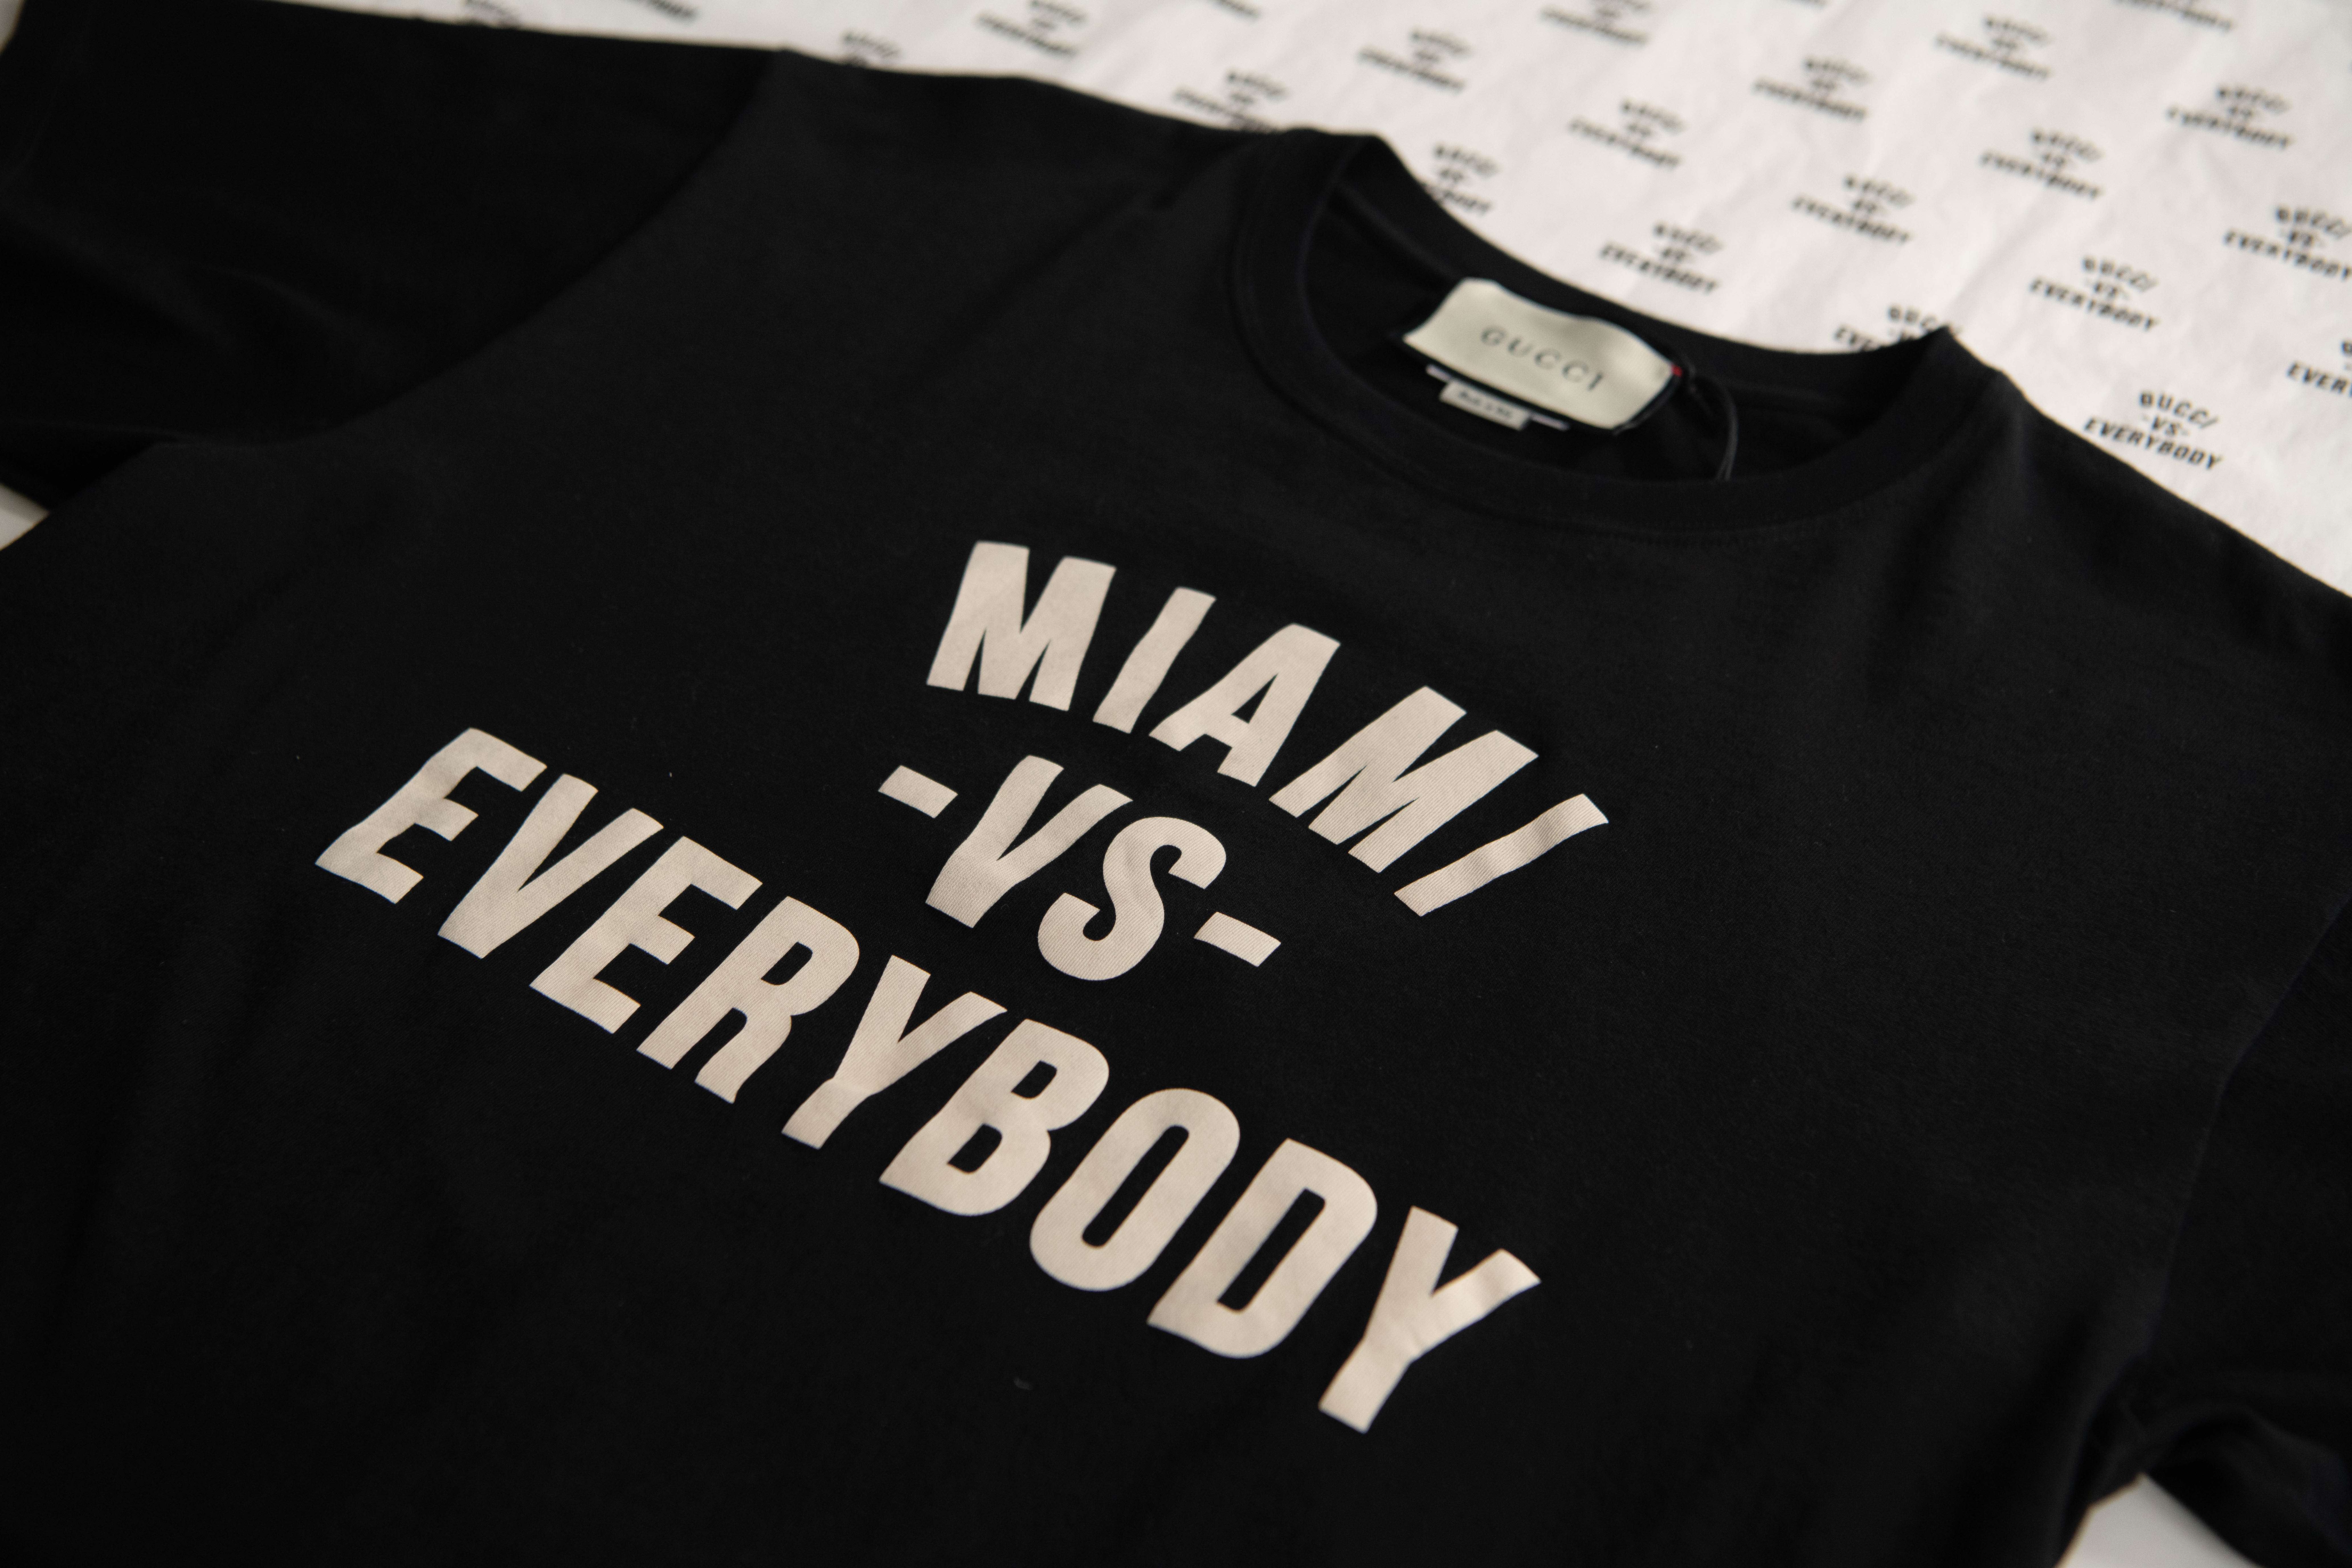 Gucci's 'Miami vs. Everybody' Limited-Edition Tees